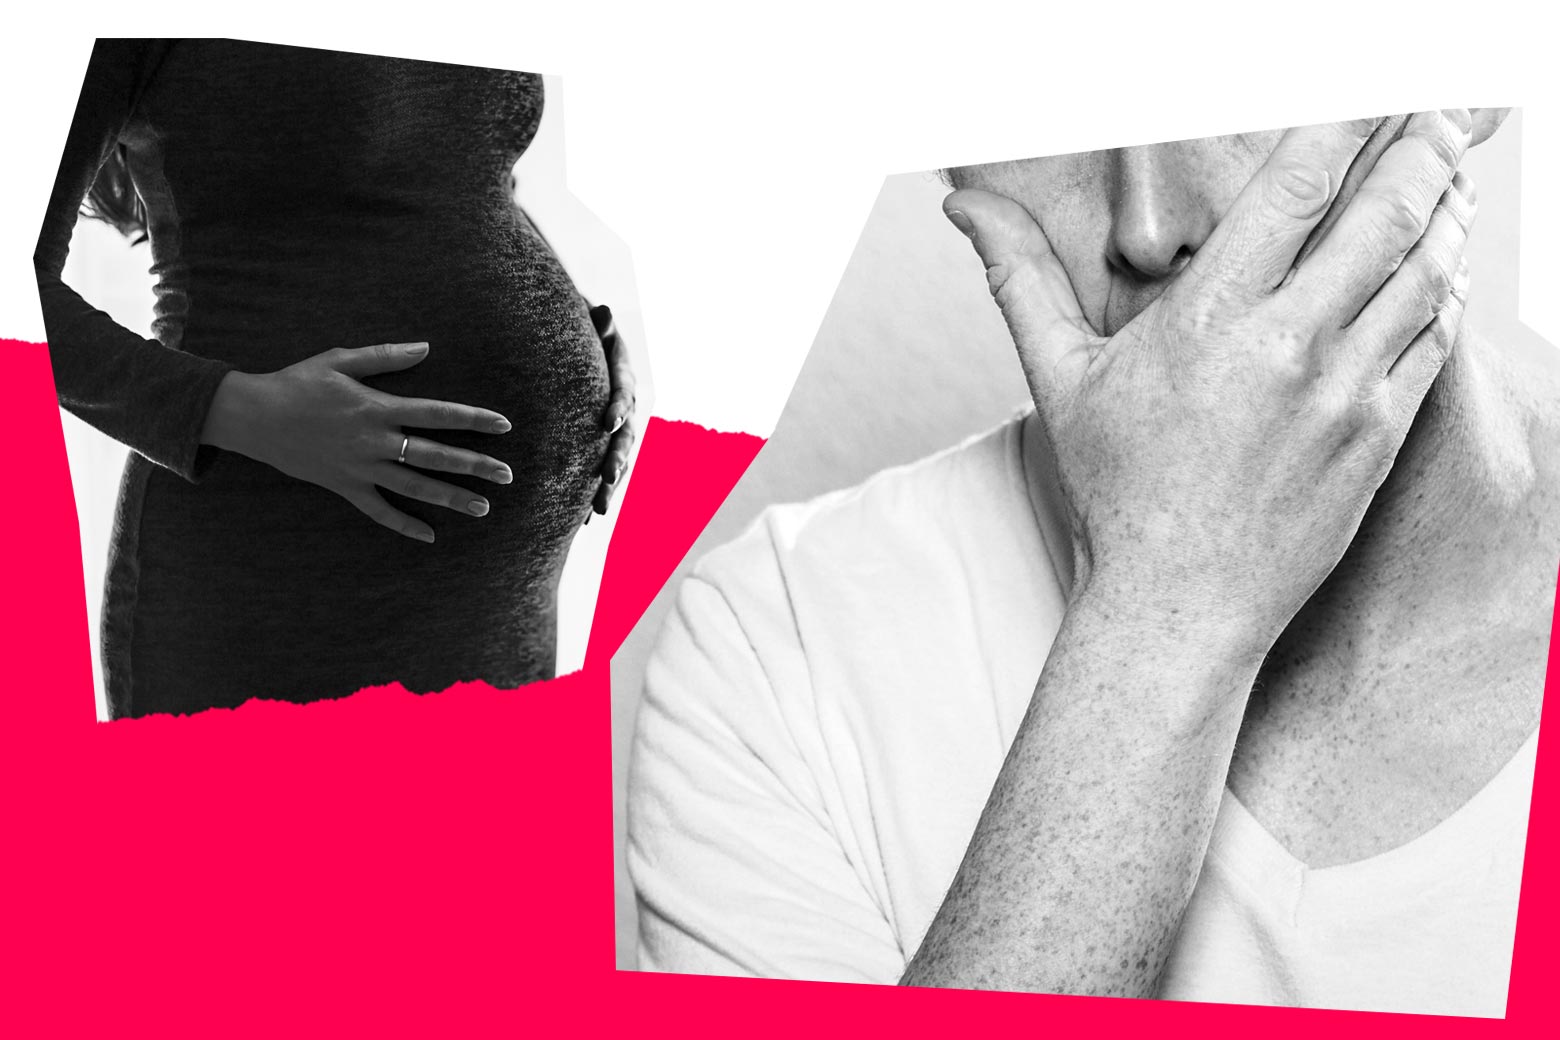 A woman holding her pregnant belly is shown at left. A man holds his hand to his face at right.